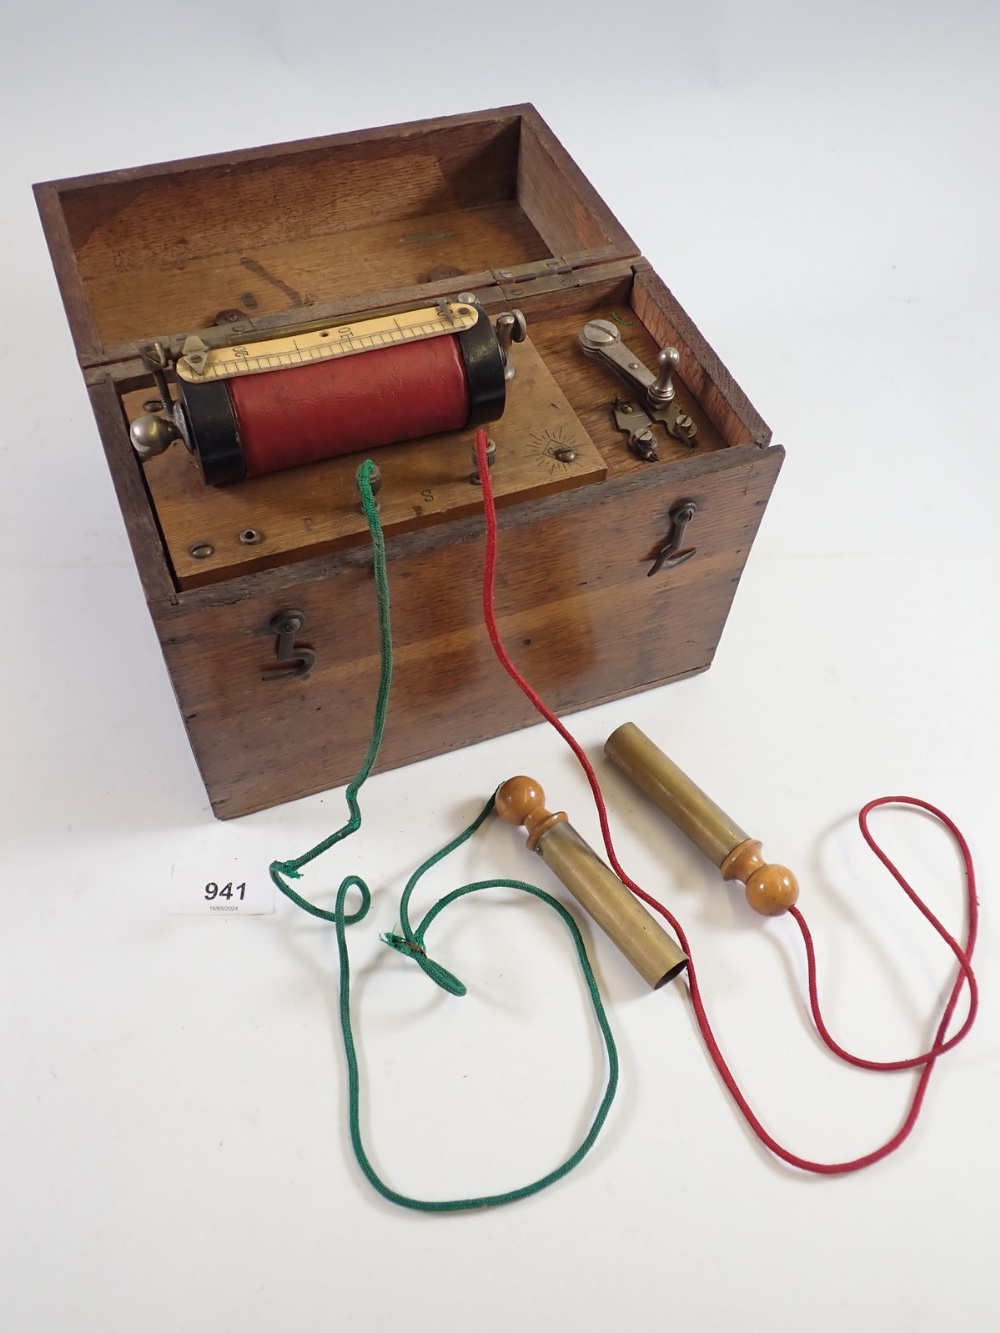 An old electric shock machine, 19cm tall - Image 2 of 3